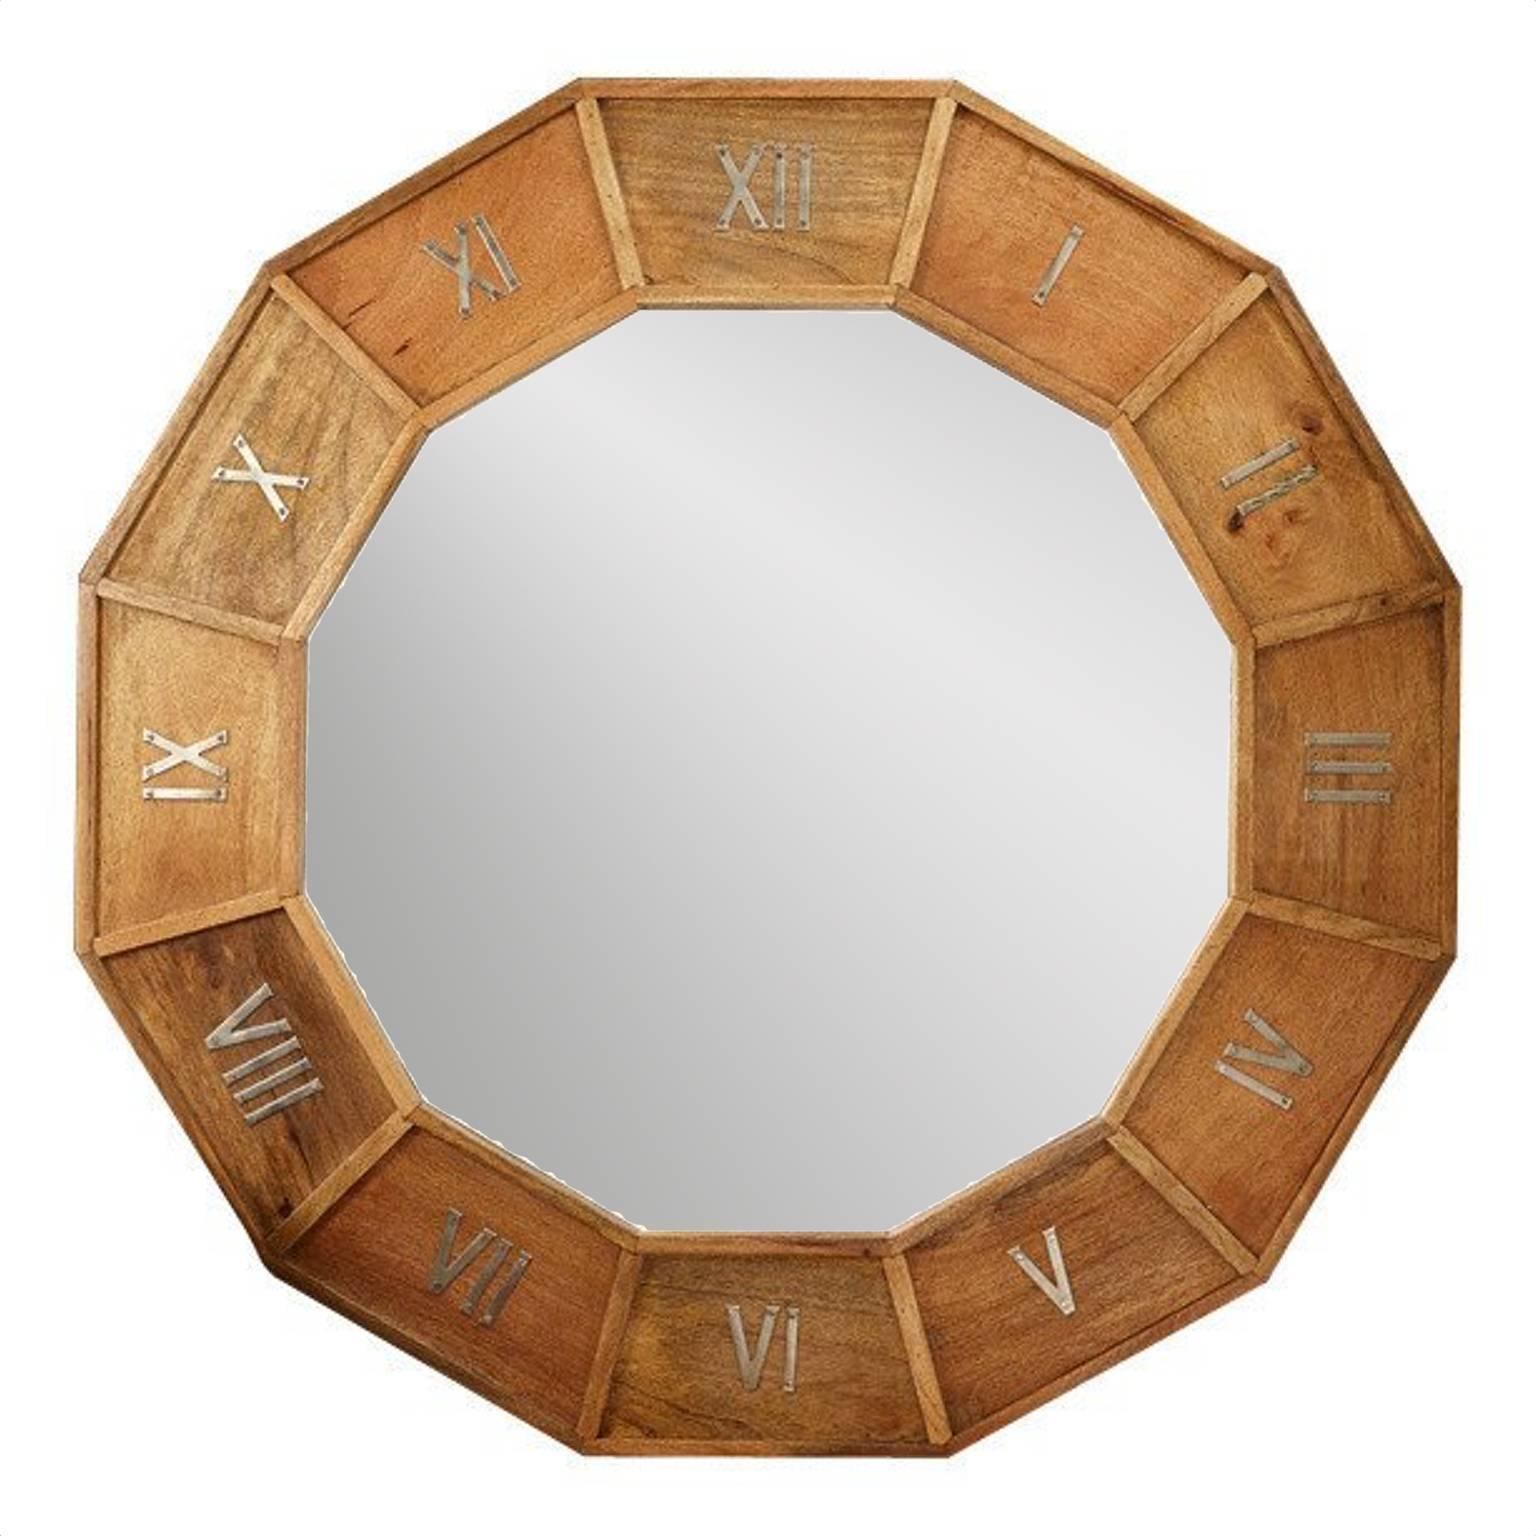 Musee D'Orsay Wooden Clock Design Wall Mirror